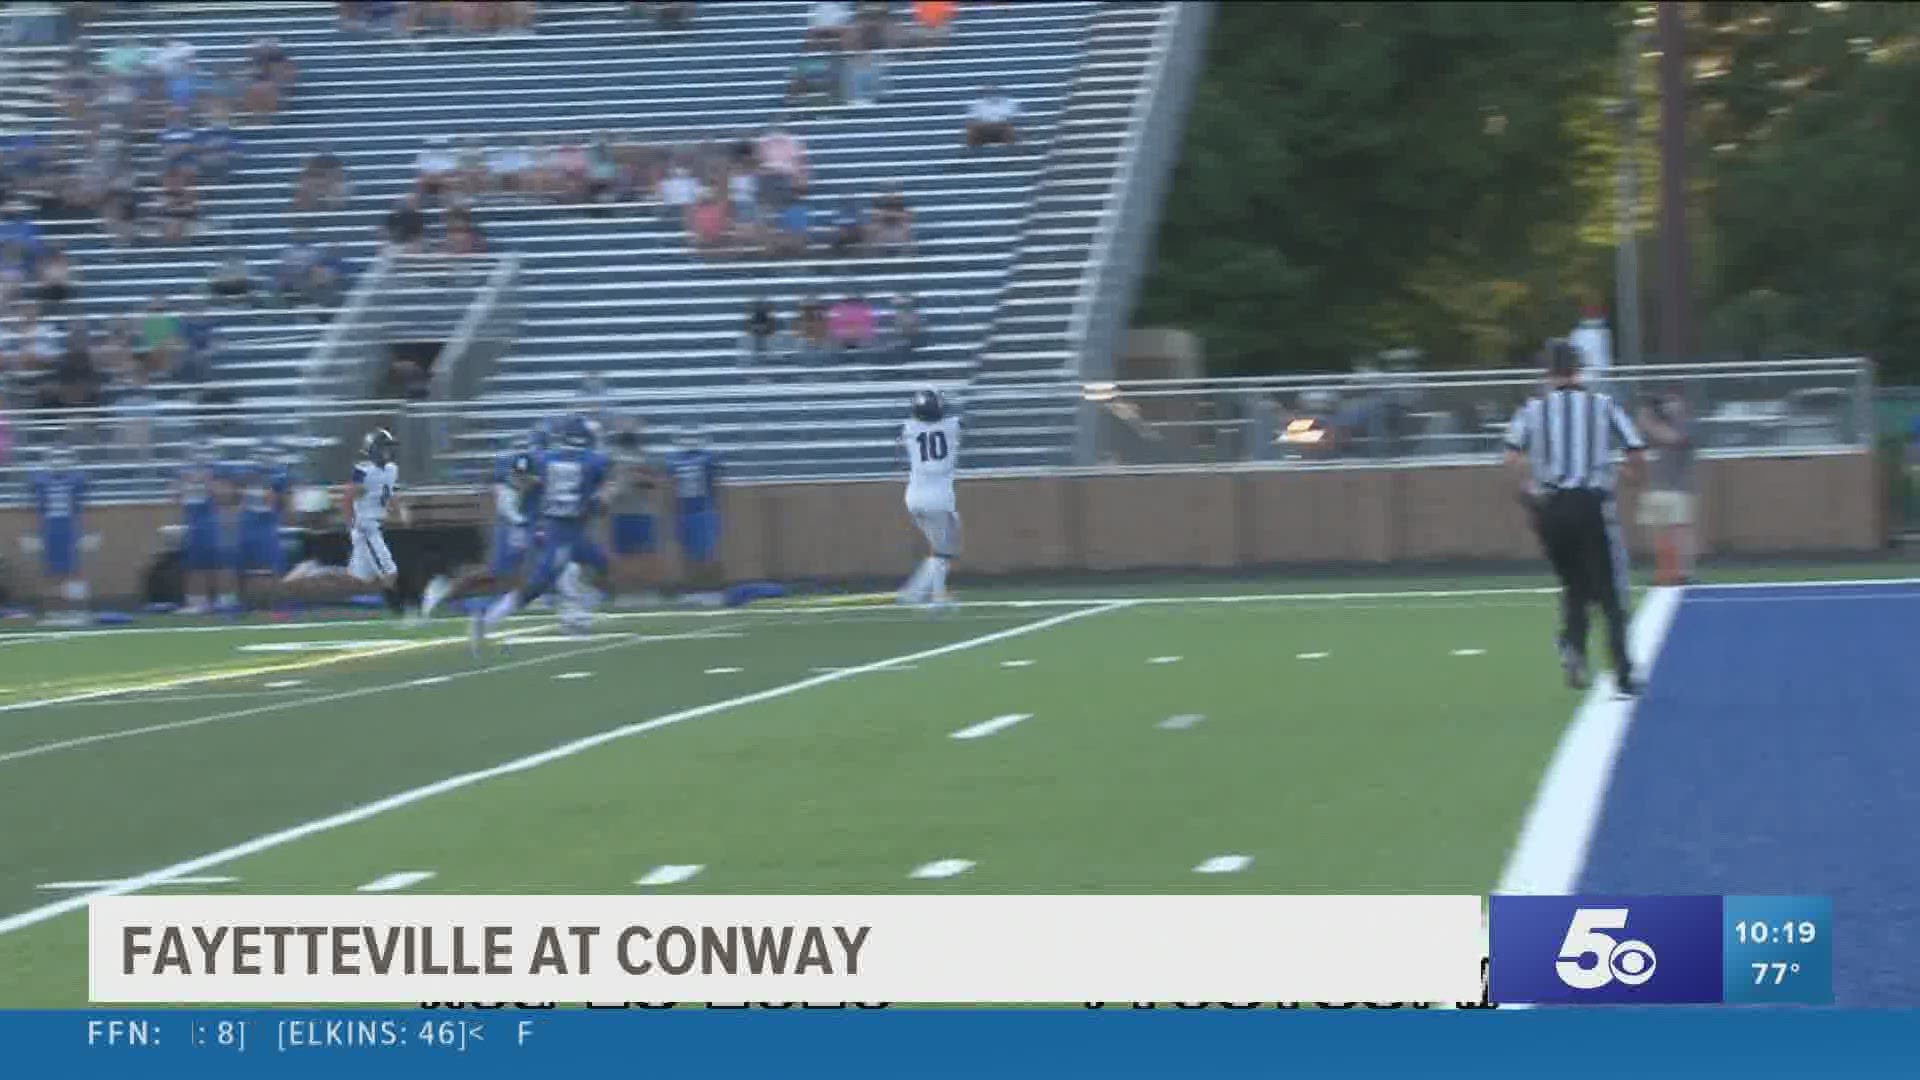 The Fayetteville Bulldogs traveled to Conway to kick off the 2020 football season.